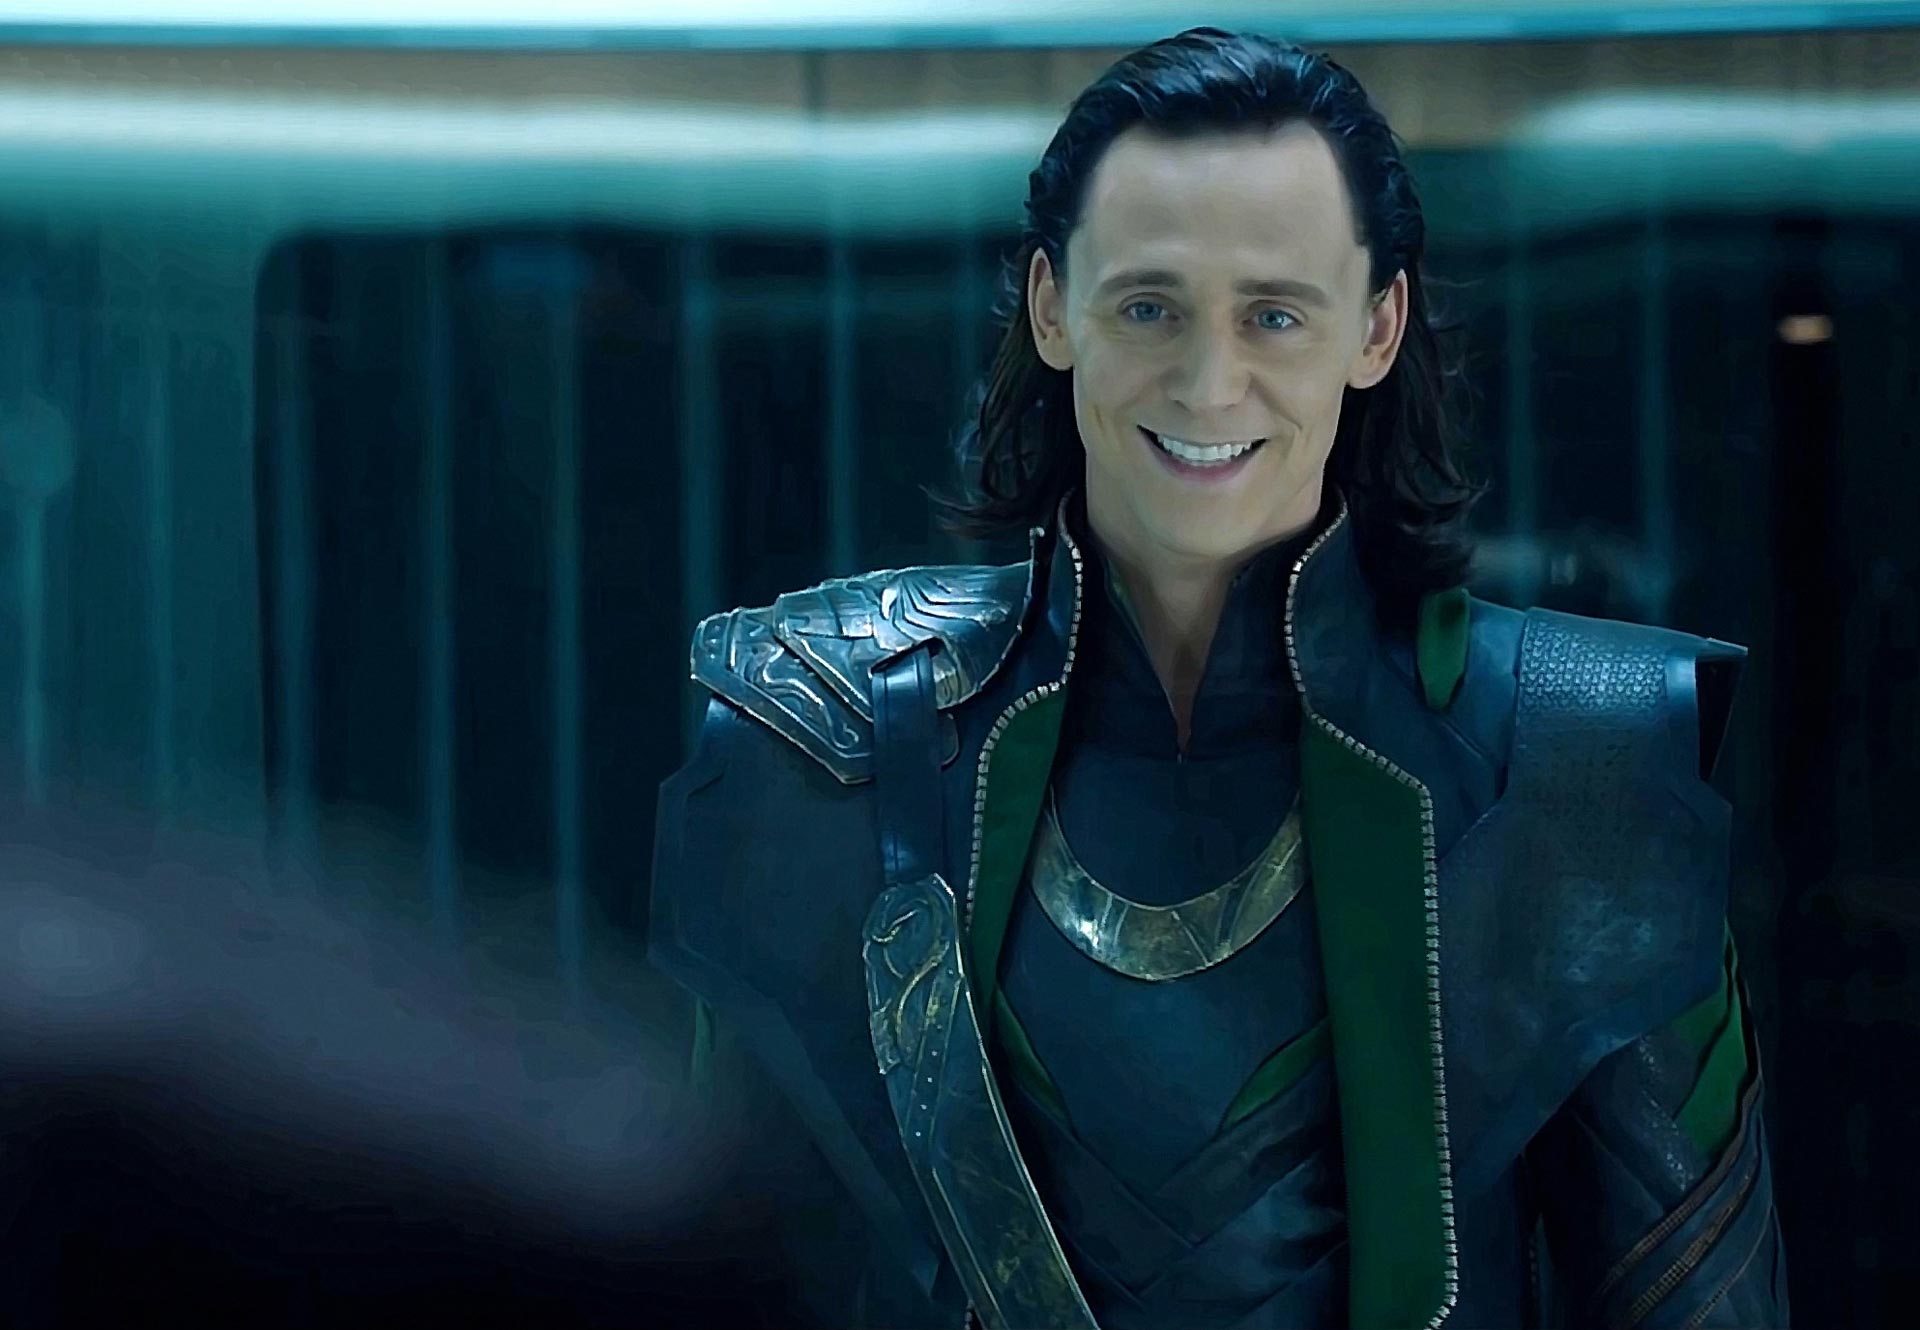 Movie News: Loki will not be returning for The Avengers sequel